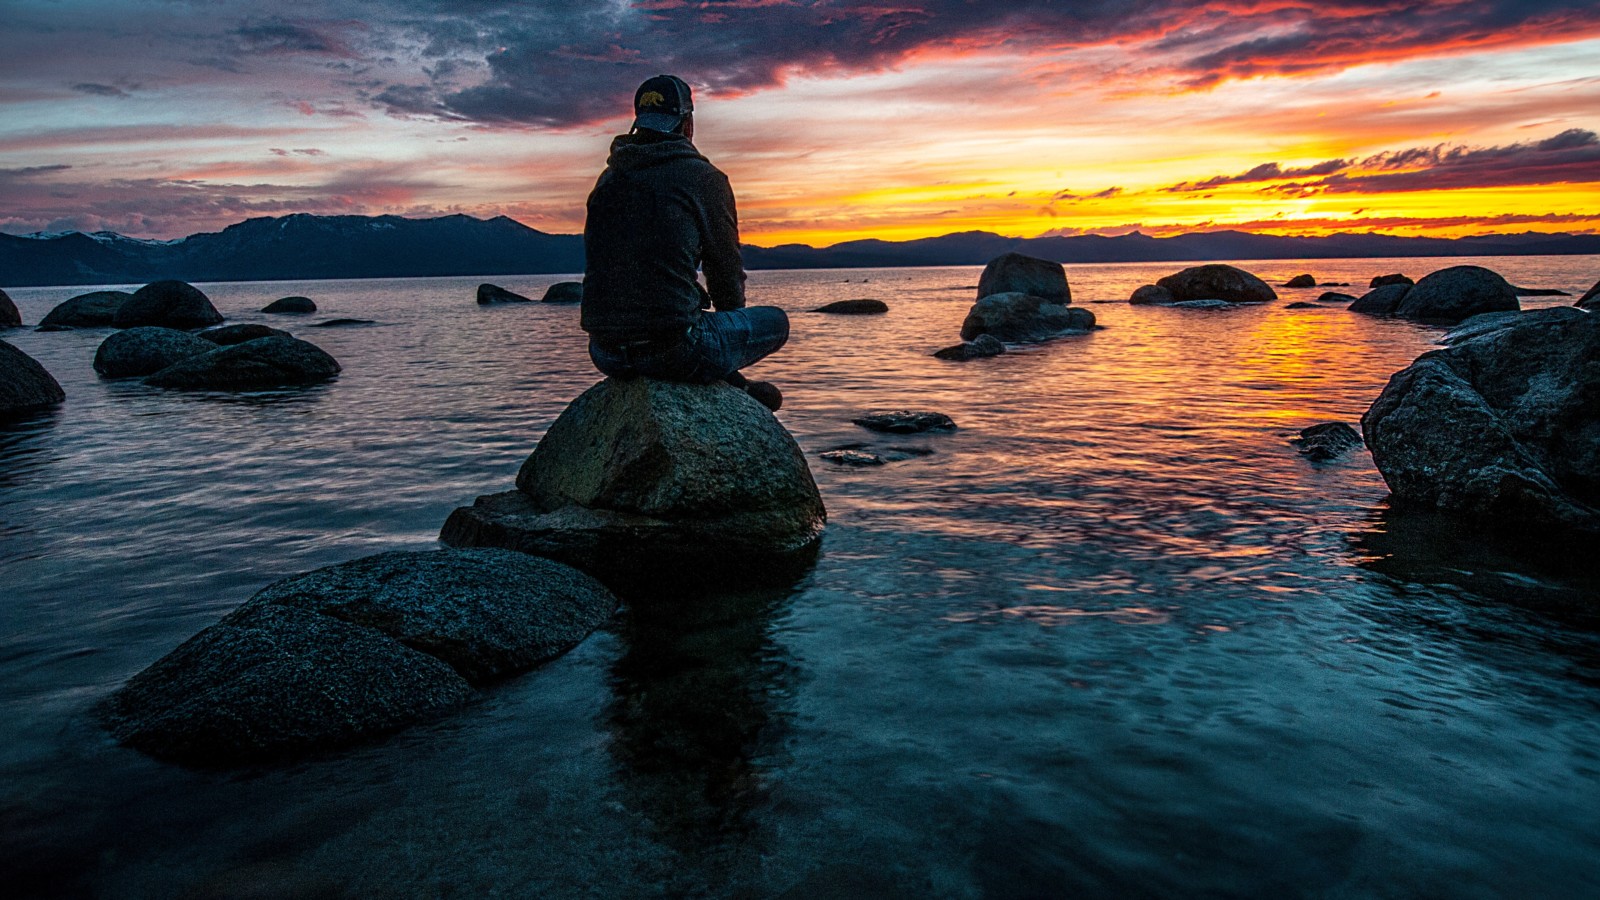 Man sitting on a rock staring at the sunset